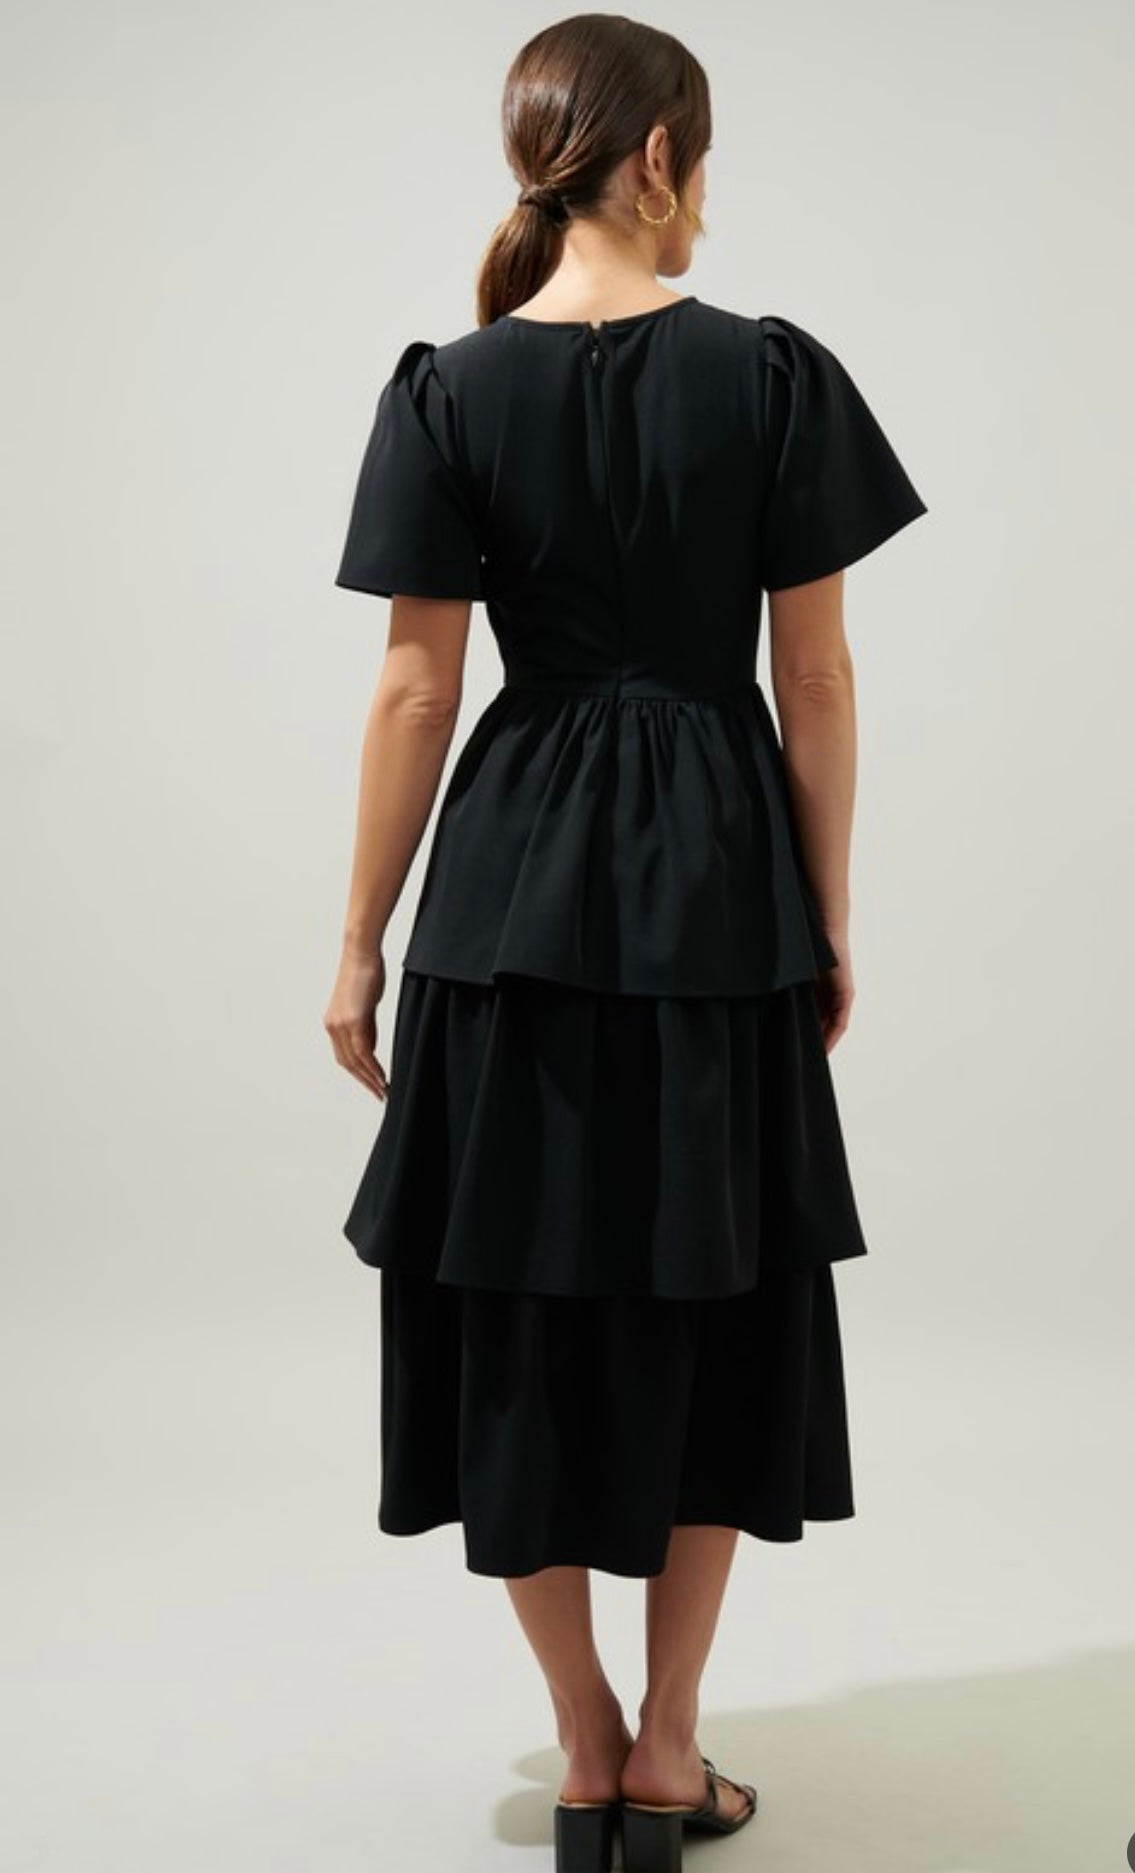 The Vincent Tiered Black Dress